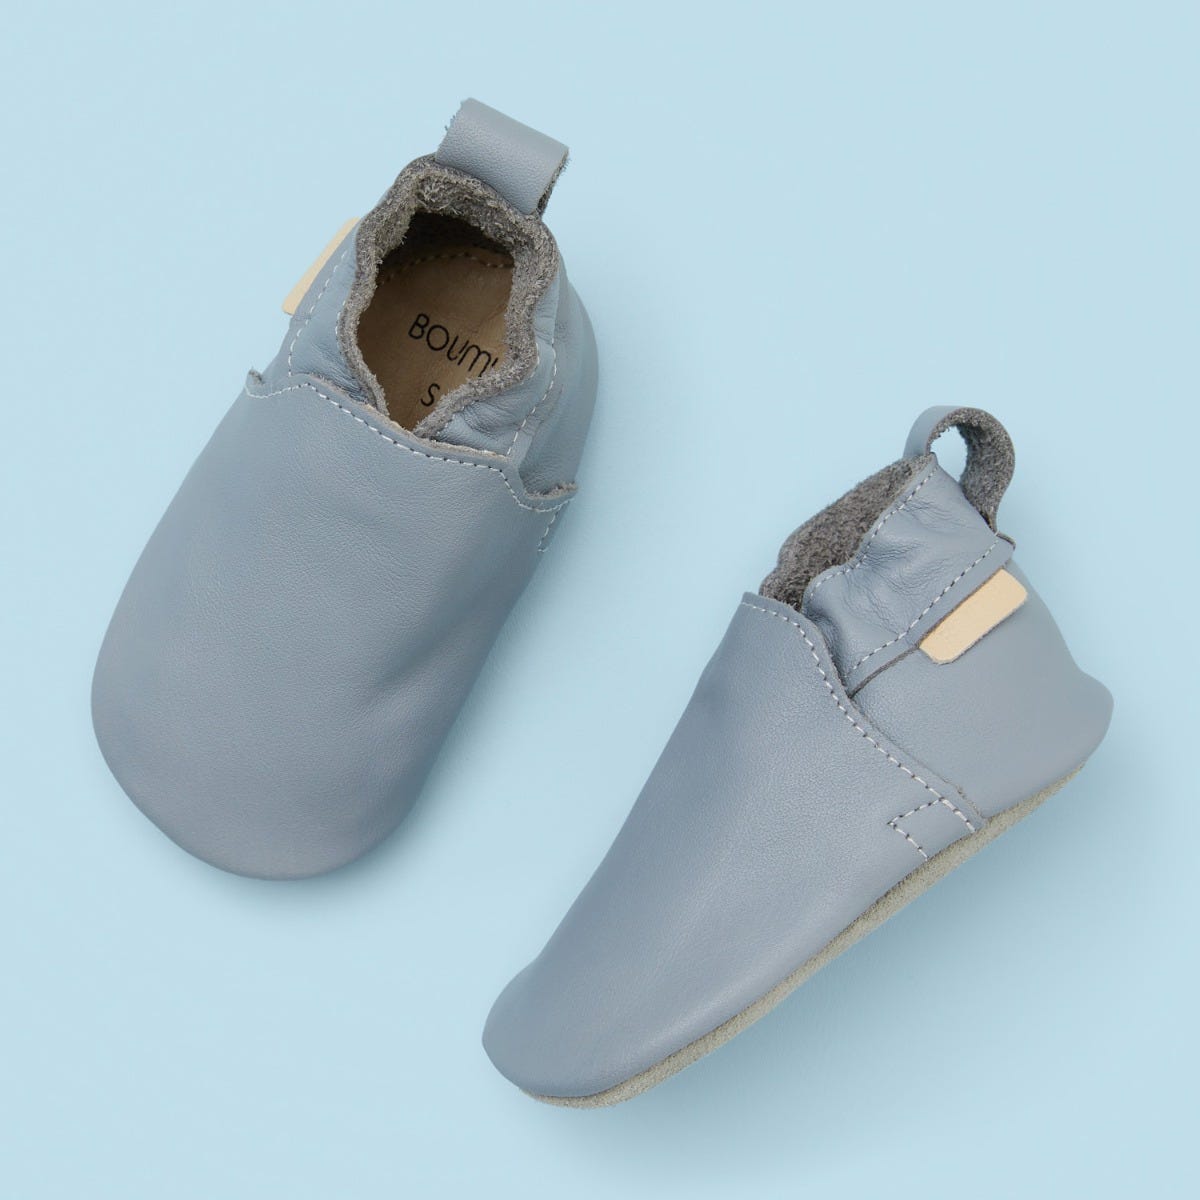 Boumy Soft Leather Shoes in Twilight Blue size 6 to 12 months